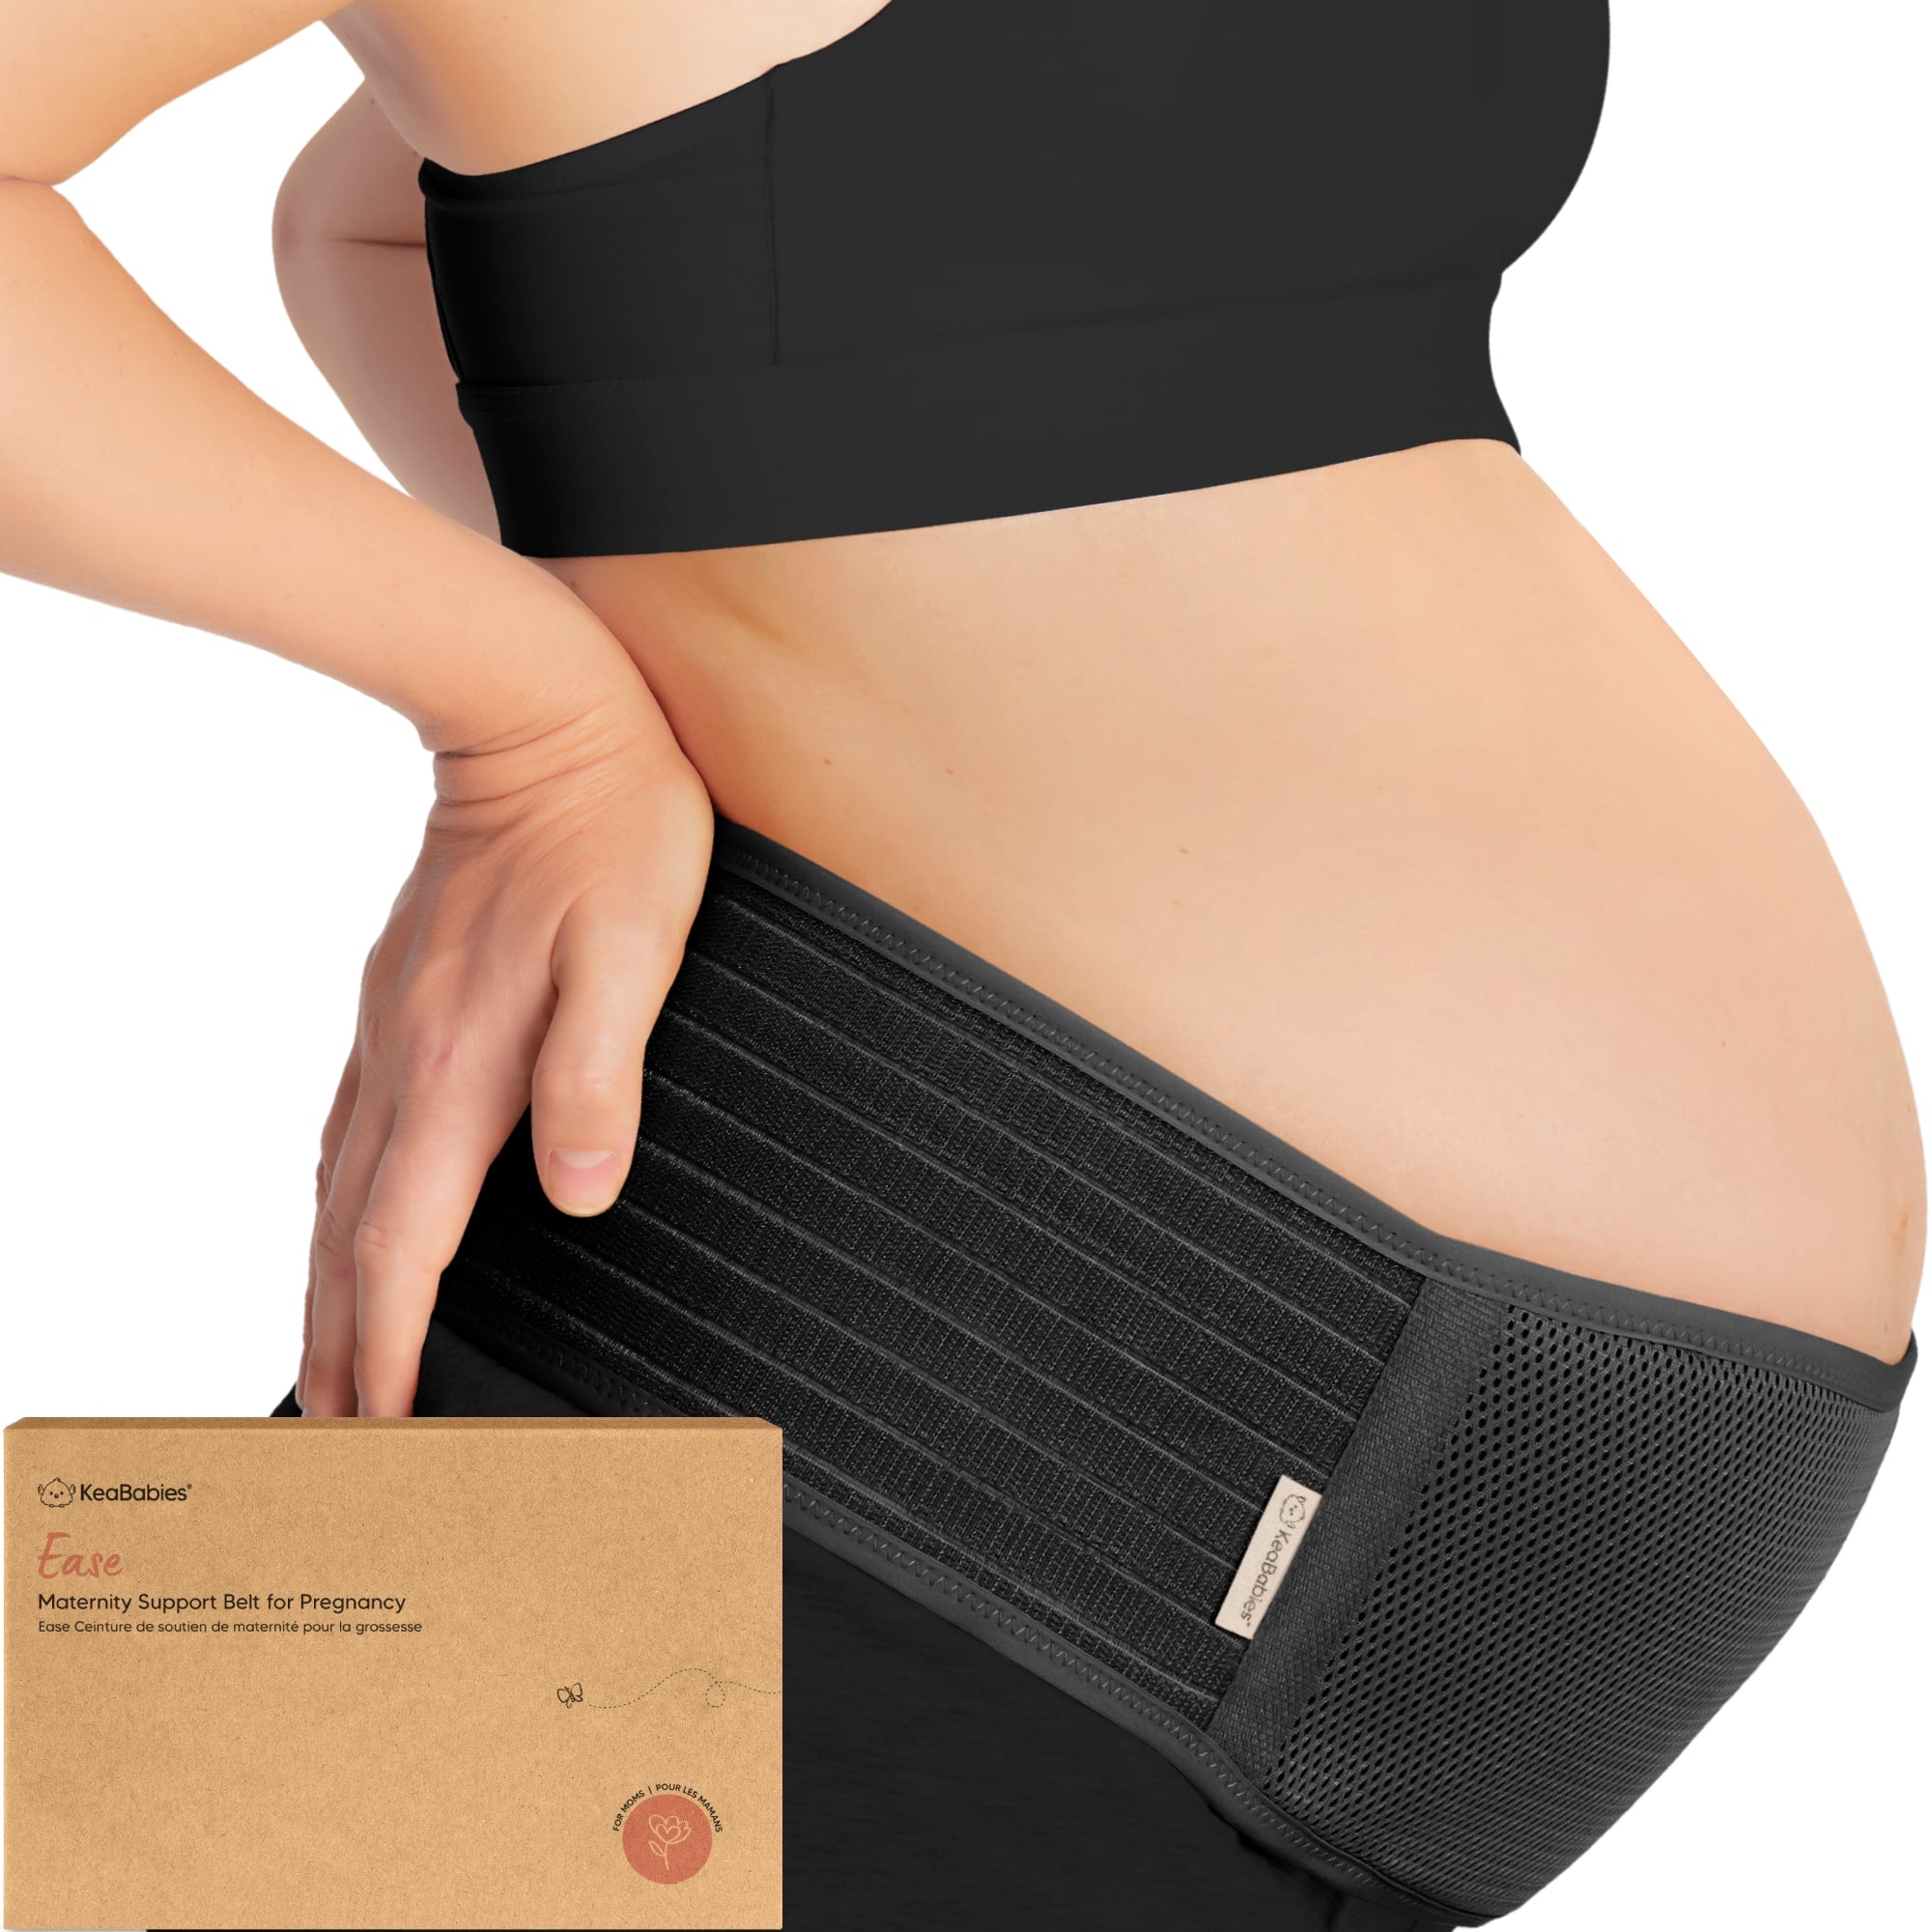 BABYGO® 4 in 1 Pregnancy Support Belt Maternity & Postpartum Band - Relieve  Back, Pelvic, Hip Pain, SPD & PGP >> inc 40 Page Pregnancy Book for Birth